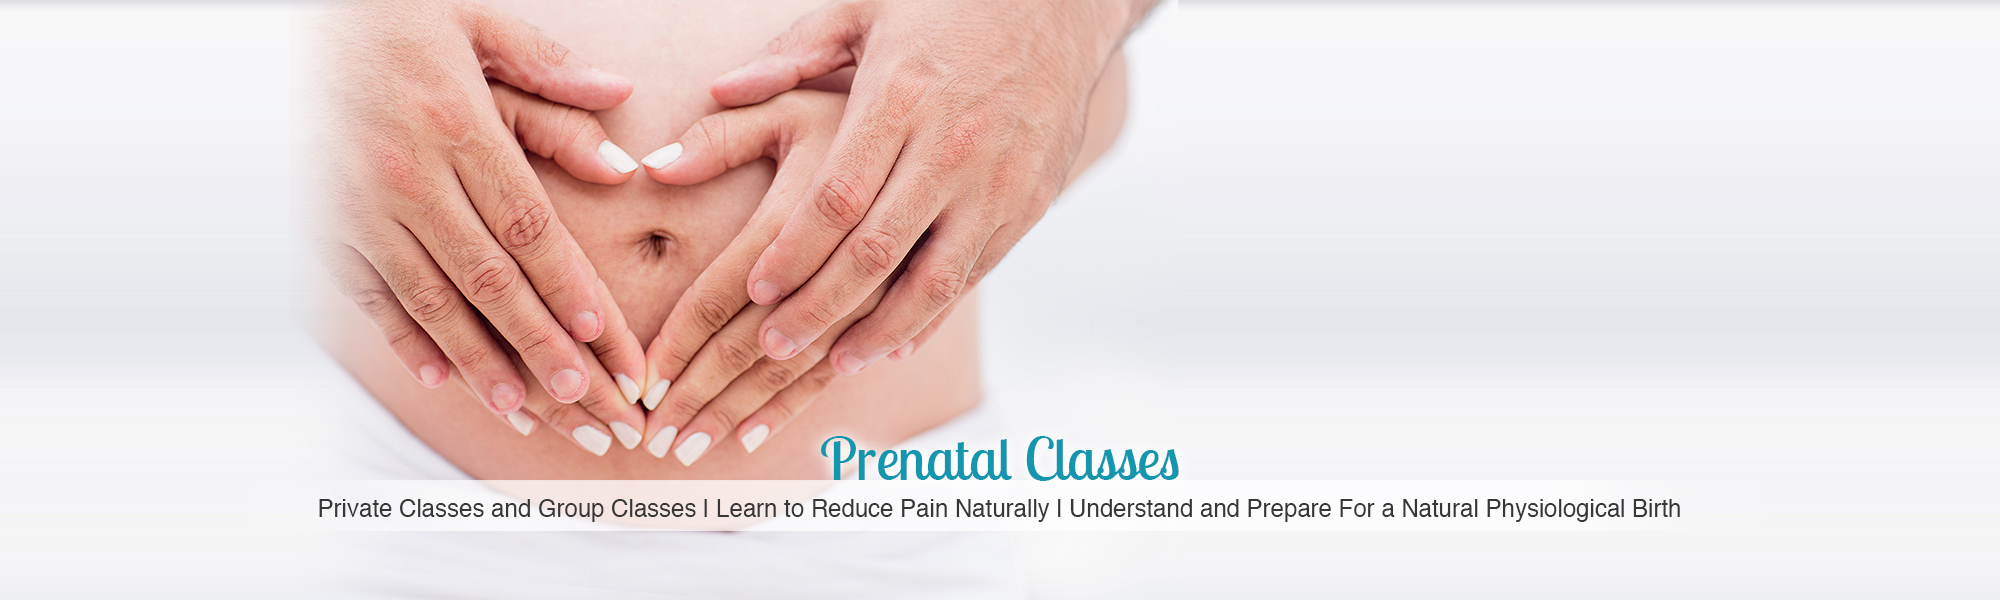 Prenatal Classes: Private Classes and Group Classes | Learn to Reduce Pain Naturally | Understand and Prepare For a Natural Physiological Birth